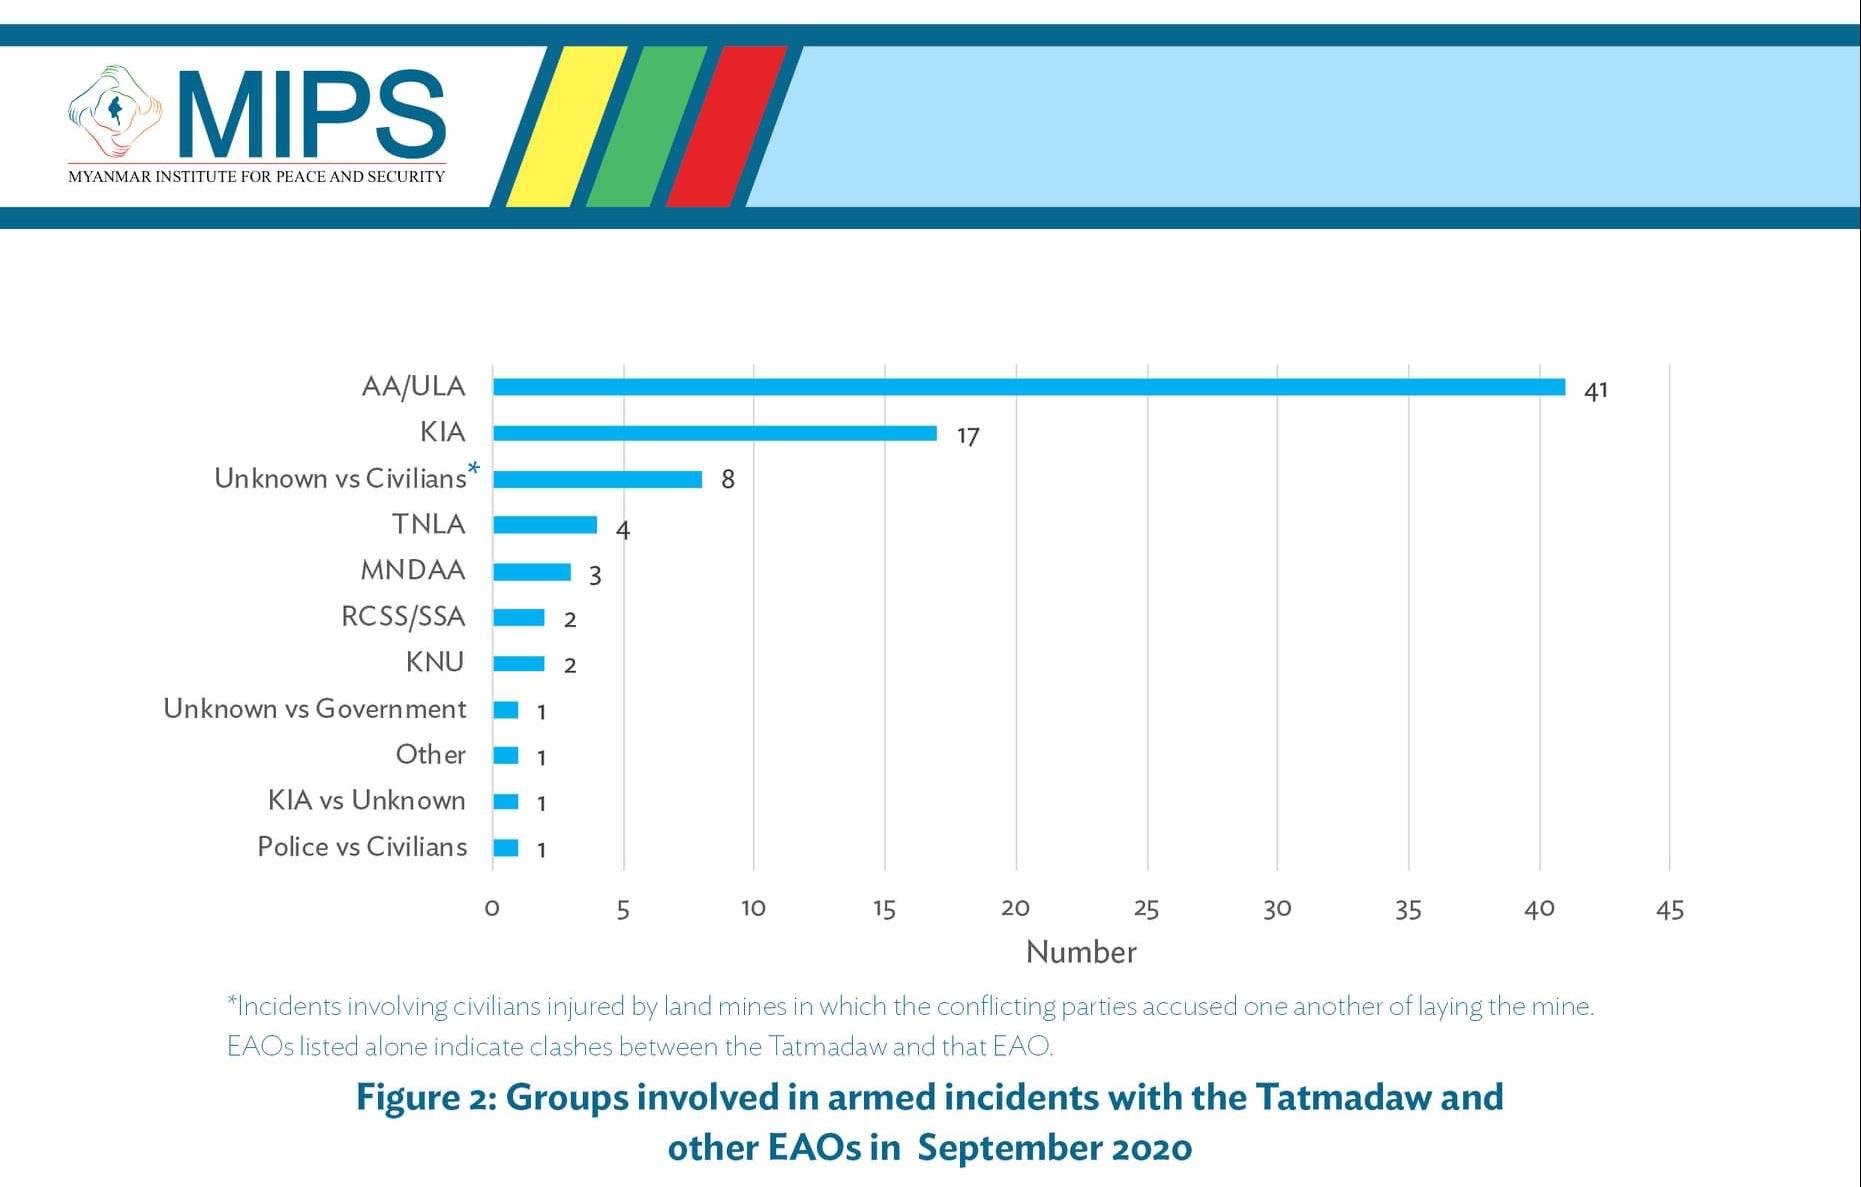 A total of 81 armed conflicts occurred in Myanmar in September, a significant increase from the previous month